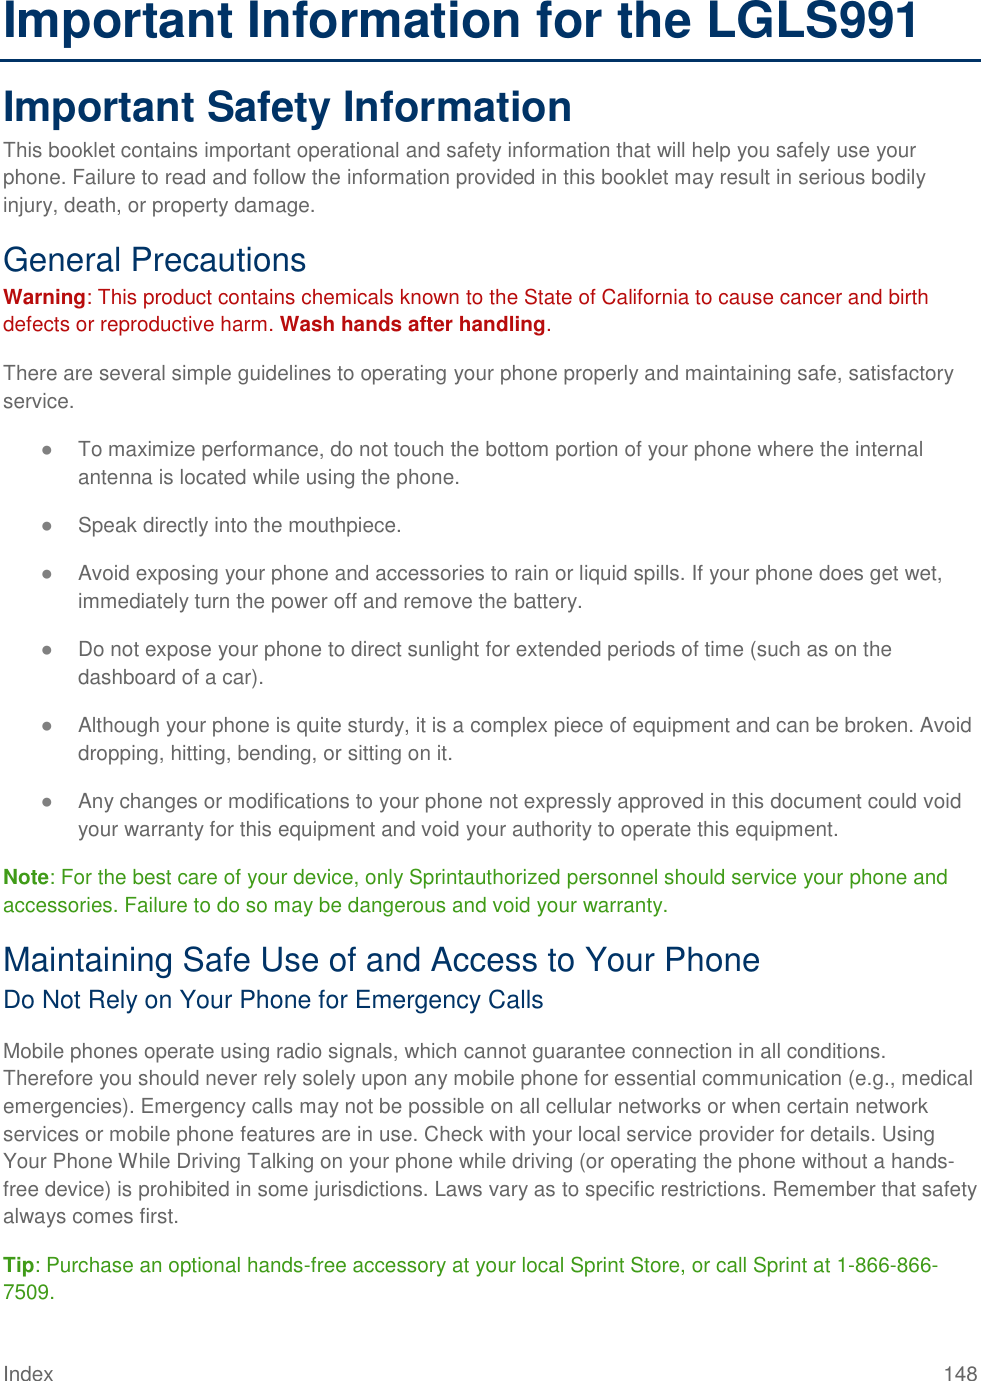 Index 148 Important Information for the LGLS991 Important Safety Information This booklet contains important operational and safety information that will help you safely use your phone. Failure to read and follow the information provided in this booklet may result in serious bodily injury, death, or property damage. General Precautions Warning: This product contains chemicals known to the State of California to cause cancer and birth defects or reproductive harm. Wash hands after handling. There are several simple guidelines to operating your phone properly and maintaining safe, satisfactory service. ● To maximize performance, do not touch the bottom portion of your phone where the internal antenna is located while using the phone. ● Speak directly into the mouthpiece. ● Avoid exposing your phone and accessories to rain or liquid spills. If your phone does get wet, immediately turn the power off and remove the battery. ● Do not expose your phone to direct sunlight for extended periods of time (such as on the dashboard of a car). ● Although your phone is quite sturdy, it is a complex piece of equipment and can be broken. Avoid dropping, hitting, bending, or sitting on it. ● Any changes or modifications to your phone not expressly approved in this document could void your warranty for this equipment and void your authority to operate this equipment. Note: For the best care of your device, only Sprintauthorized personnel should service your phone and accessories. Failure to do so may be dangerous and void your warranty. Maintaining Safe Use of and Access to Your Phone Do Not Rely on Your Phone for Emergency Calls Mobile phones operate using radio signals, which cannot guarantee connection in all conditions. Therefore you should never rely solely upon any mobile phone for essential communication (e.g., medical emergencies). Emergency calls may not be possible on all cellular networks or when certain network services or mobile phone features are in use. Check with your local service provider for details. Using Your Phone While Driving Talking on your phone while driving (or operating the phone without a hands-free device) is prohibited in some jurisdictions. Laws vary as to specific restrictions. Remember that safety always comes first. Tip: Purchase an optional hands-free accessory at your local Sprint Store, or call Sprint at 1-866-866-7509. 